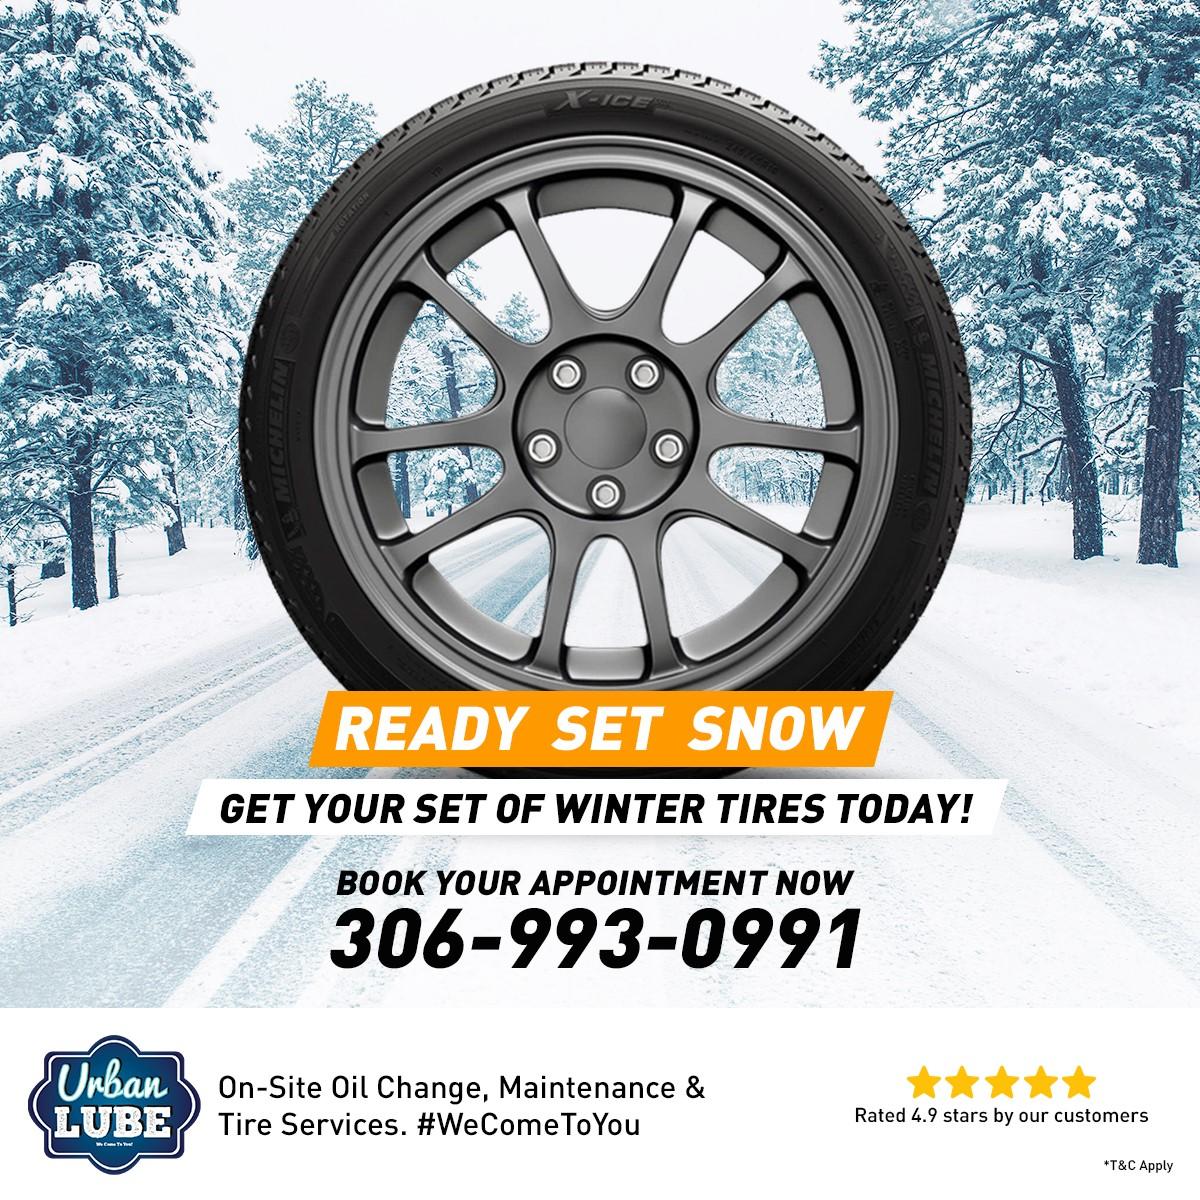 Get Your Set Of Winter Tires Today!